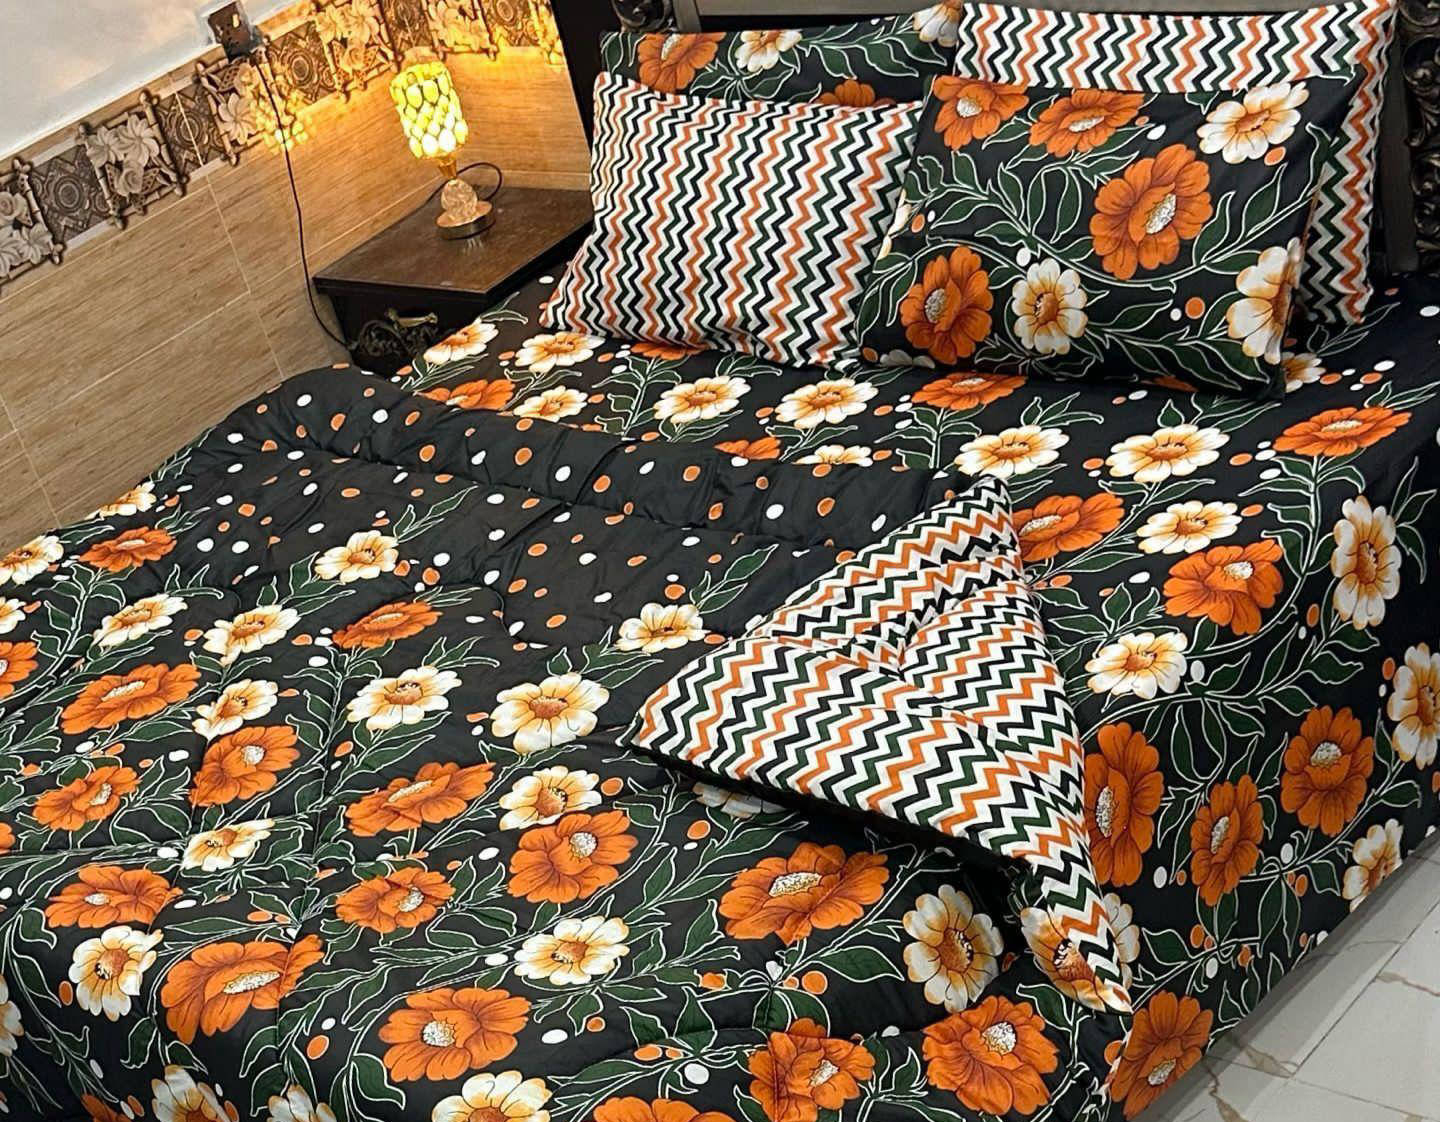 Bed Sheet Set with Vicky Razai